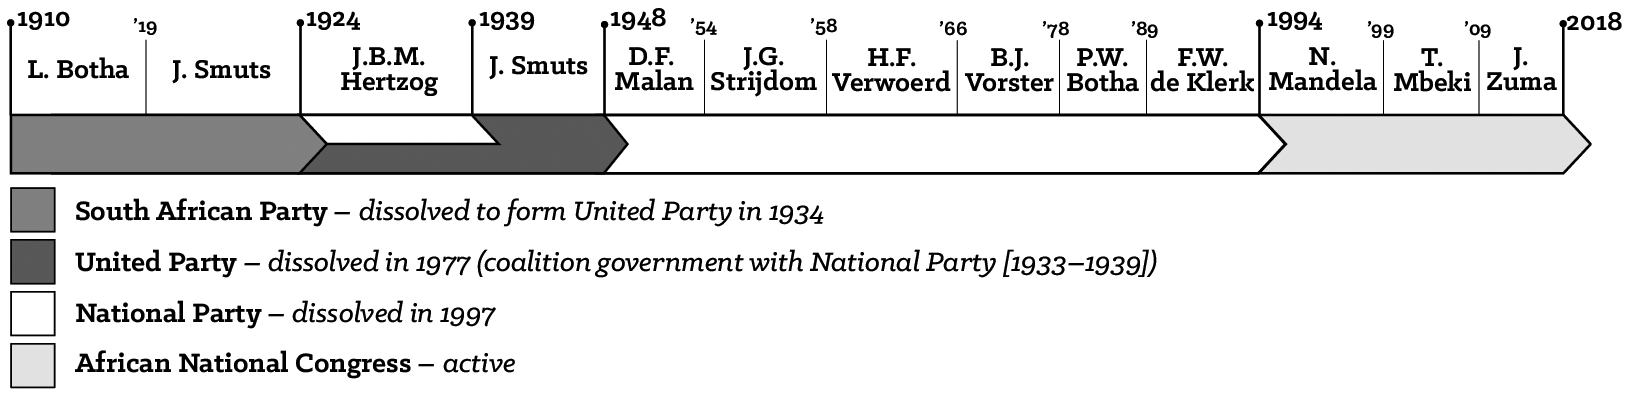 Figure i: Political Parties Controlling South African Government Since 1910